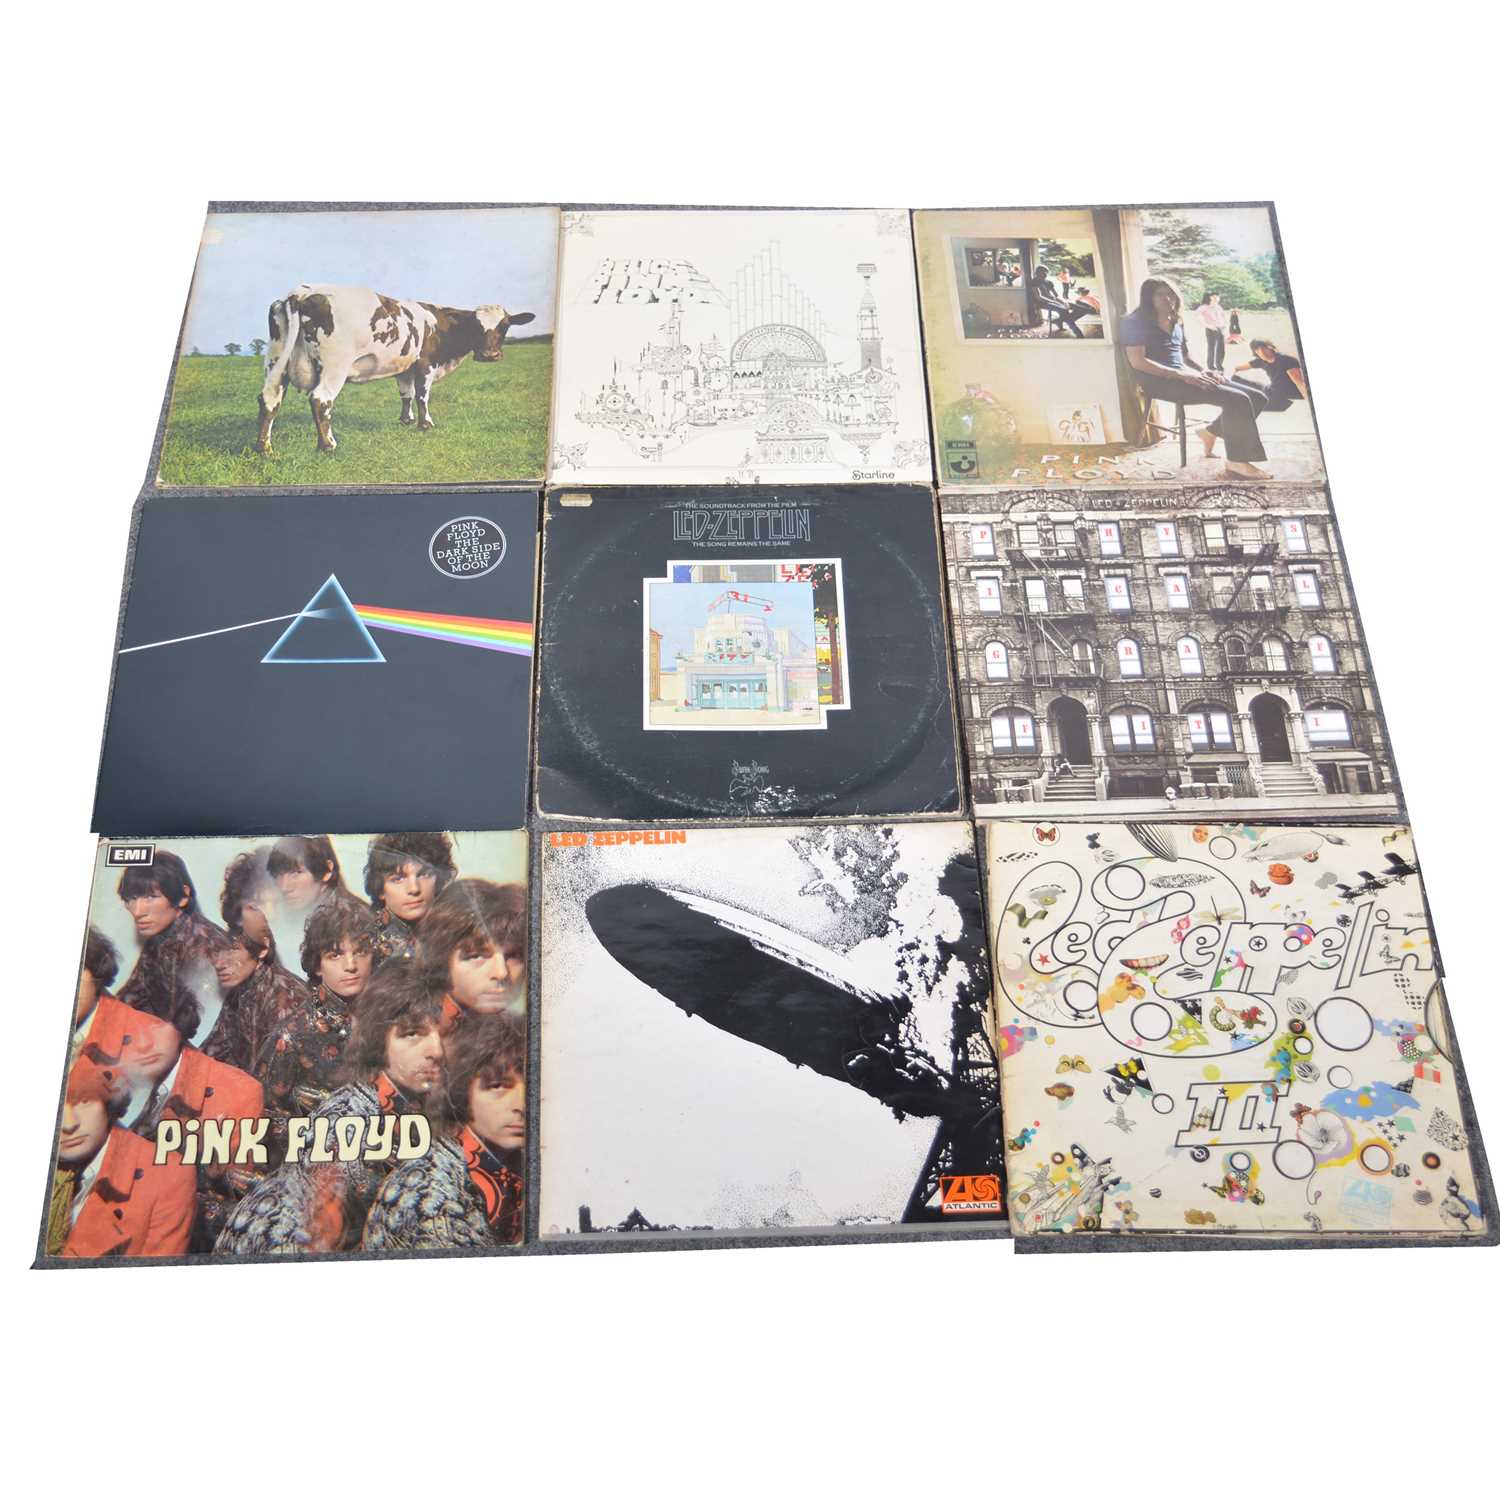 Lot 6 - Eight Led Zeppelin and Pink Floyd LP vinyl records